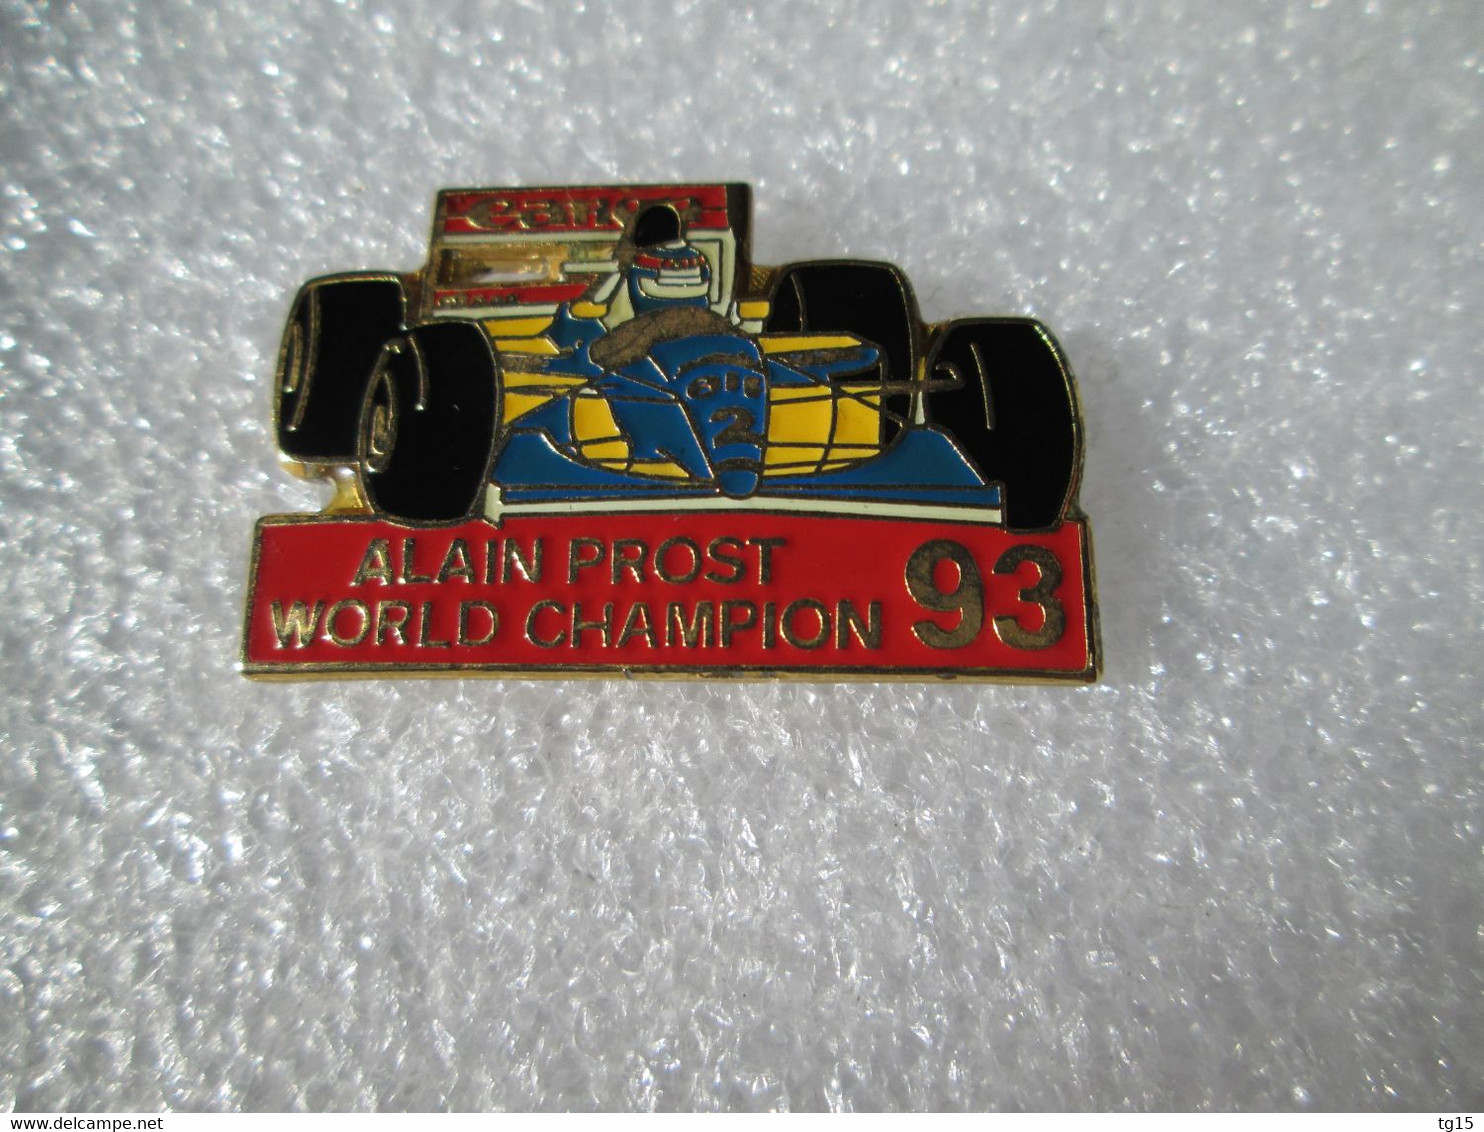 RARE TOP PIN'S   ALAIN PROST WORLD CHAMPION 1993  FORMULE 1  WILLIAMS RENAULT  email grand feu